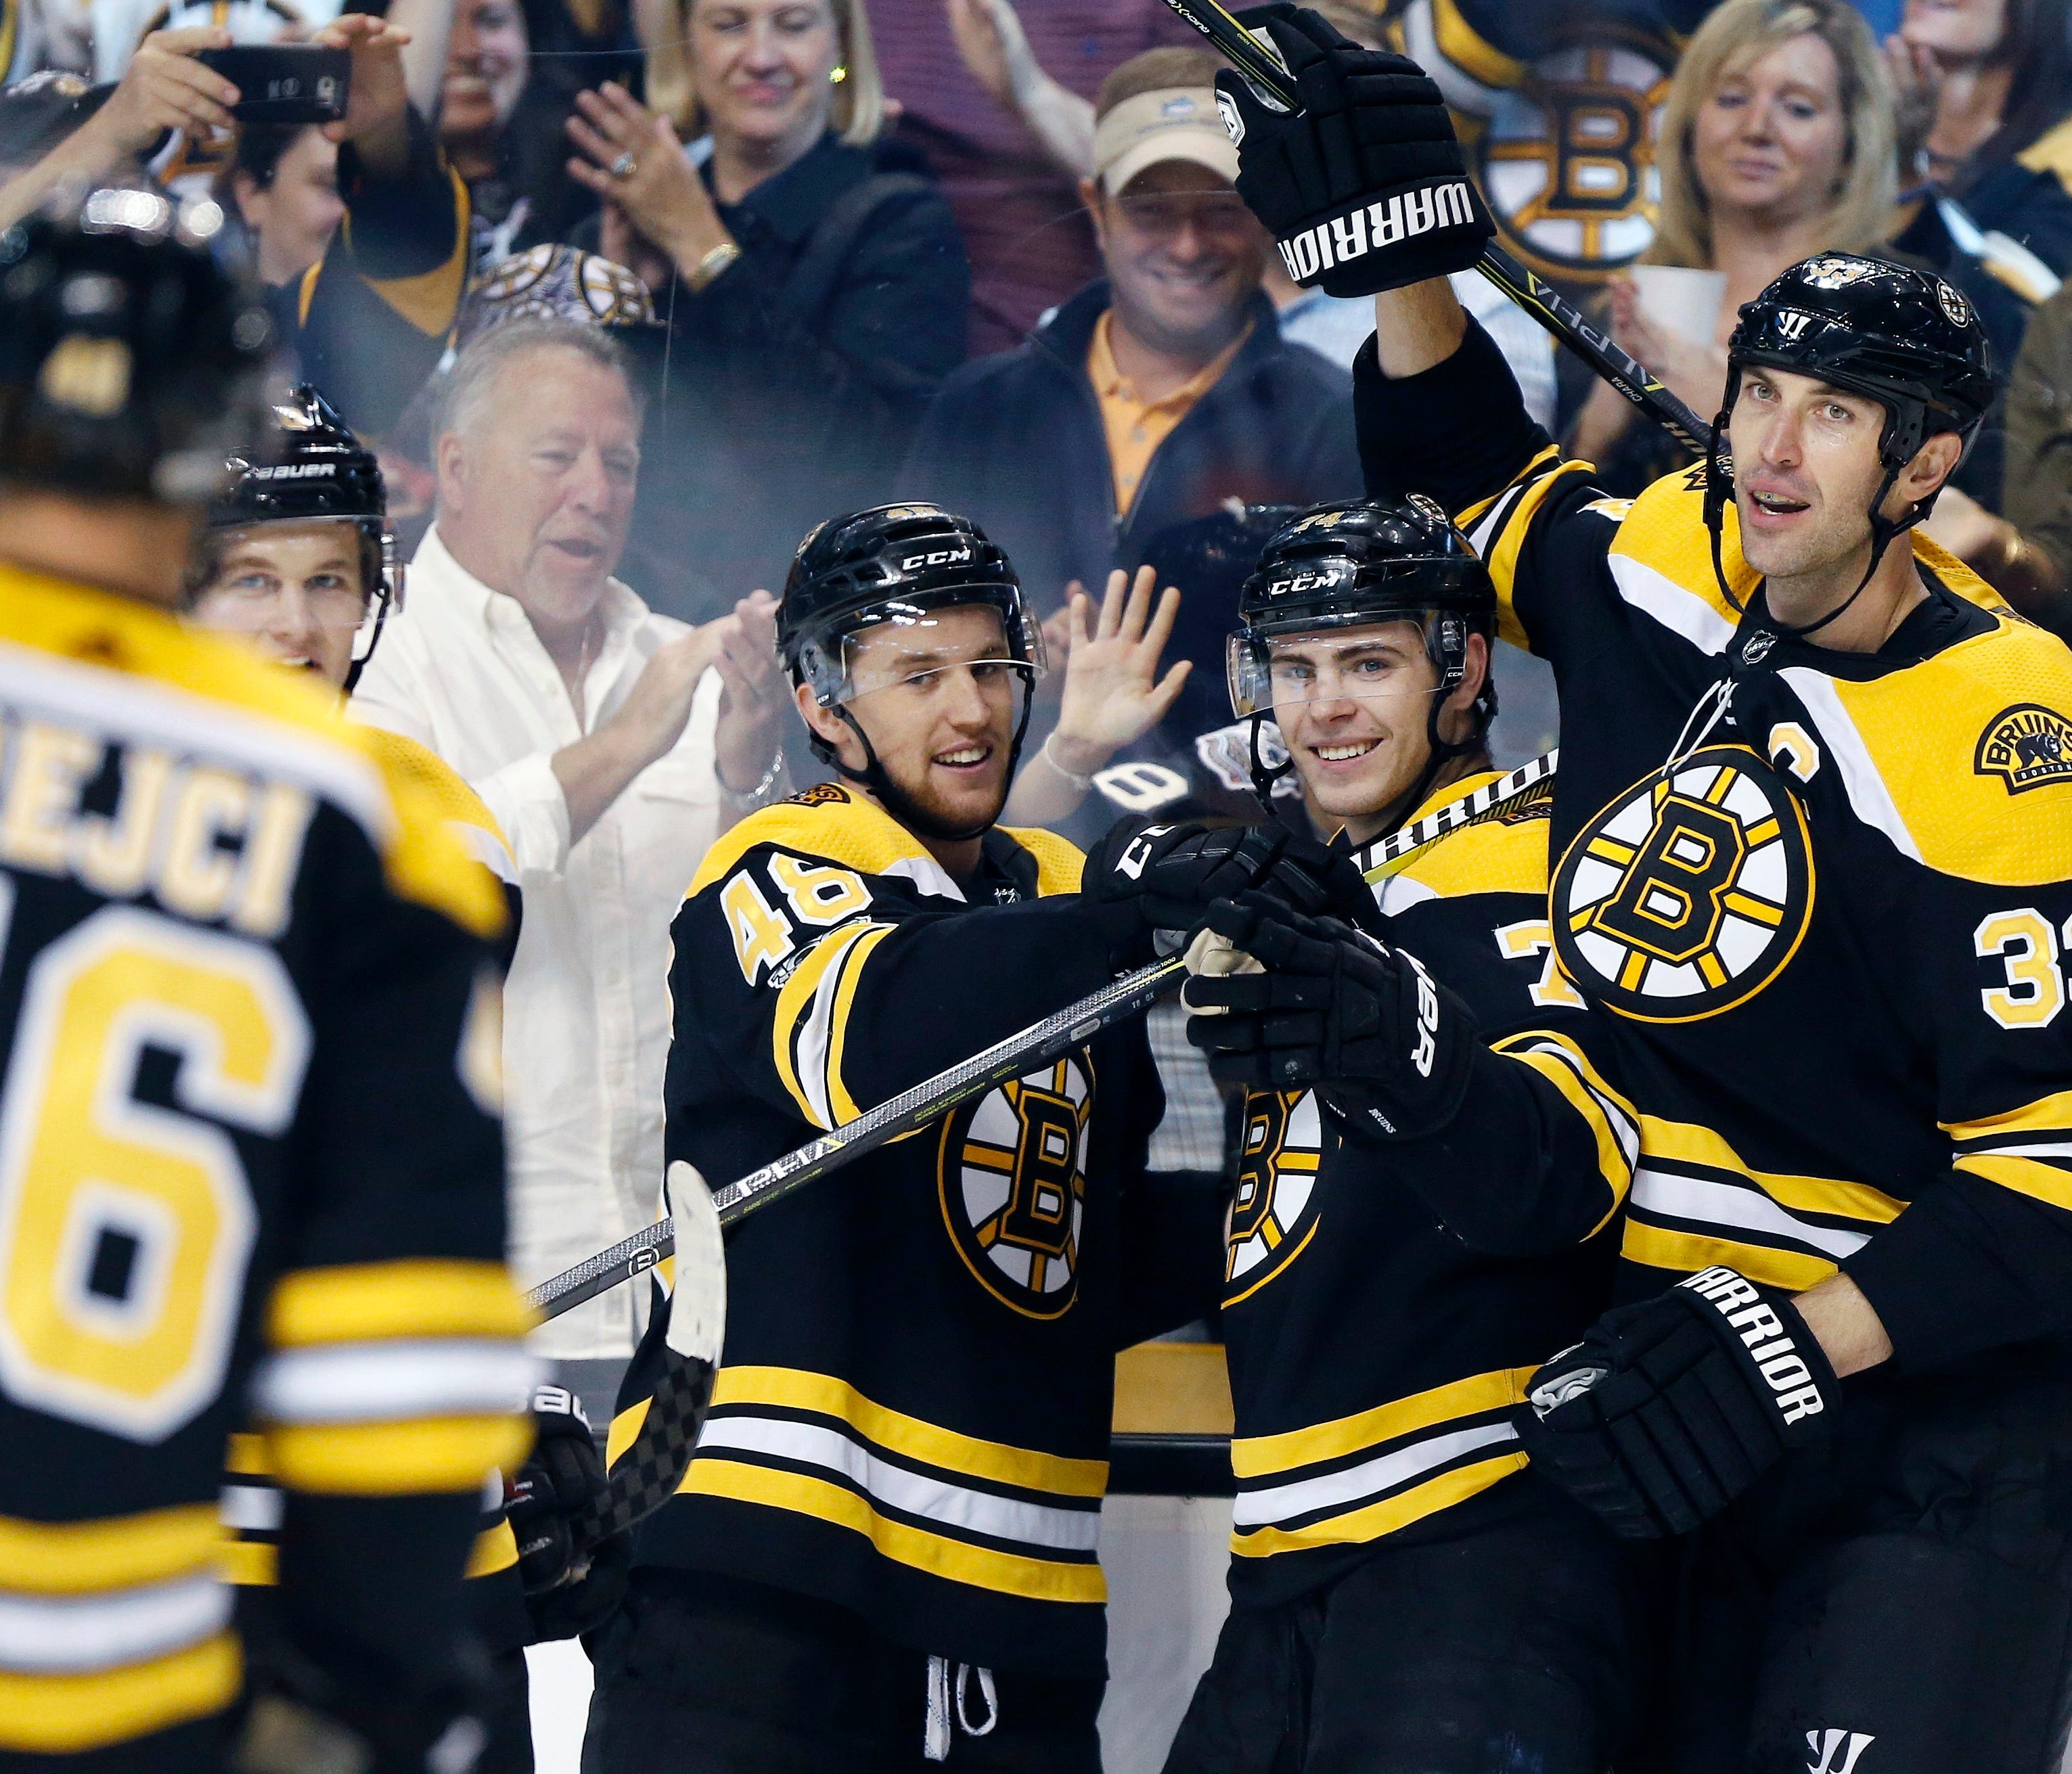 Boston Bruins' Jake DeBrusk (74) celebrates his goal with Matt Grzelcyk (48) and Zdeno Chara (33) during the second period of an NHL hockey game in Boston, Thursday, Oct. 5, 2017. (AP Photo/Michael Dwyer) ORG XMIT: MAMD101